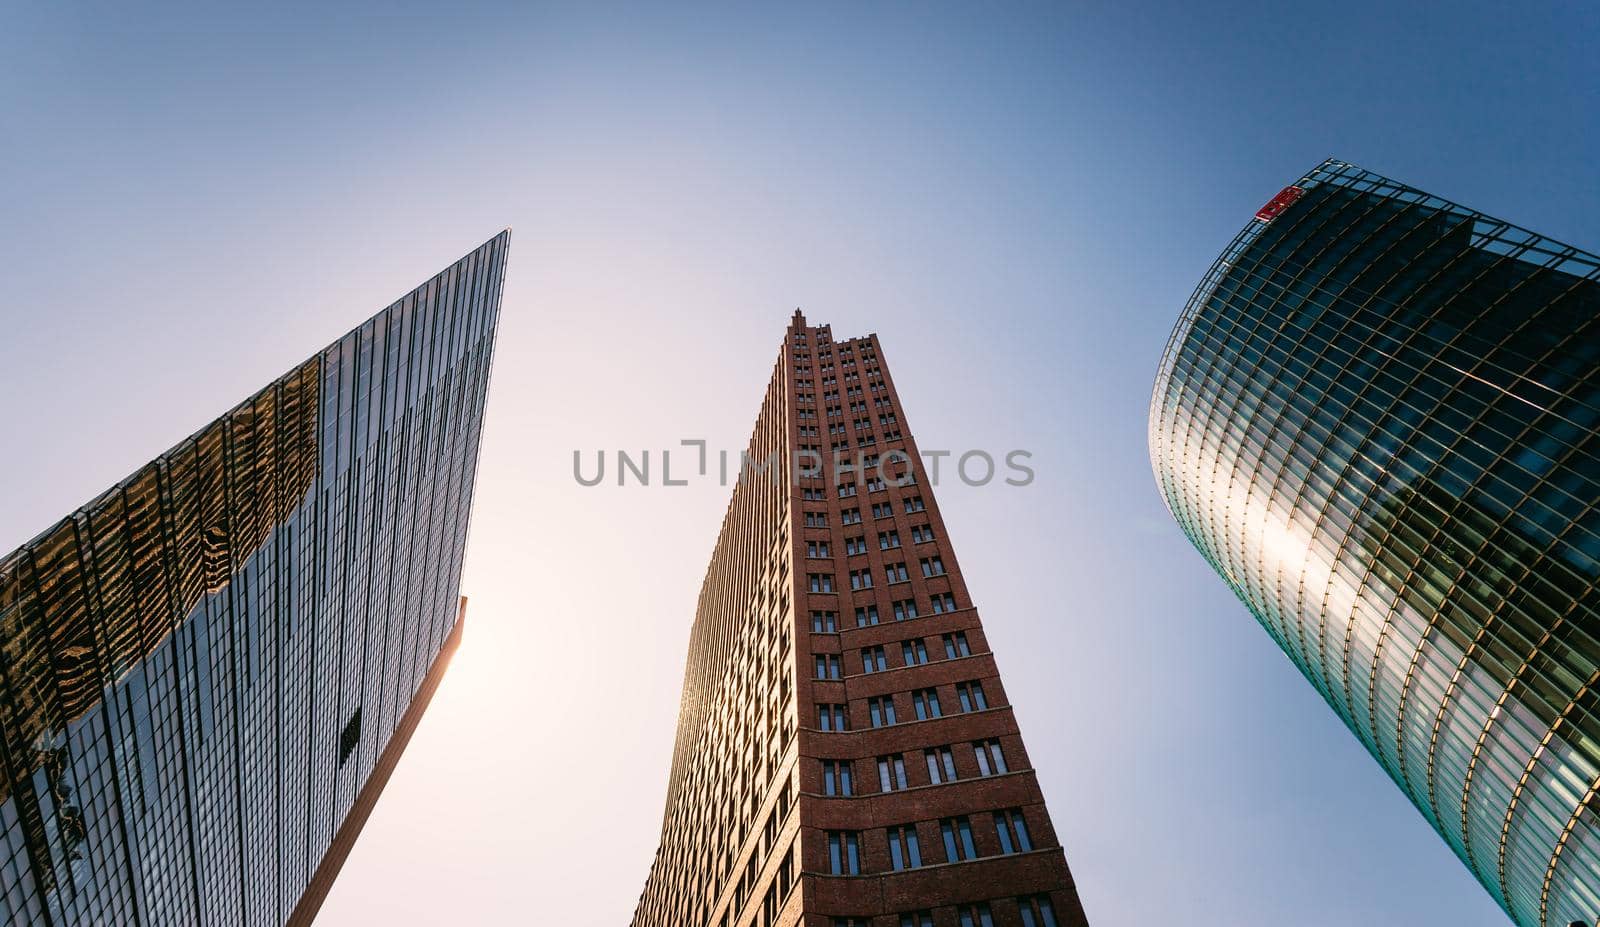 Skyscrapers on Postsdamer square in Berlin, evening scenery by Daxenbichler